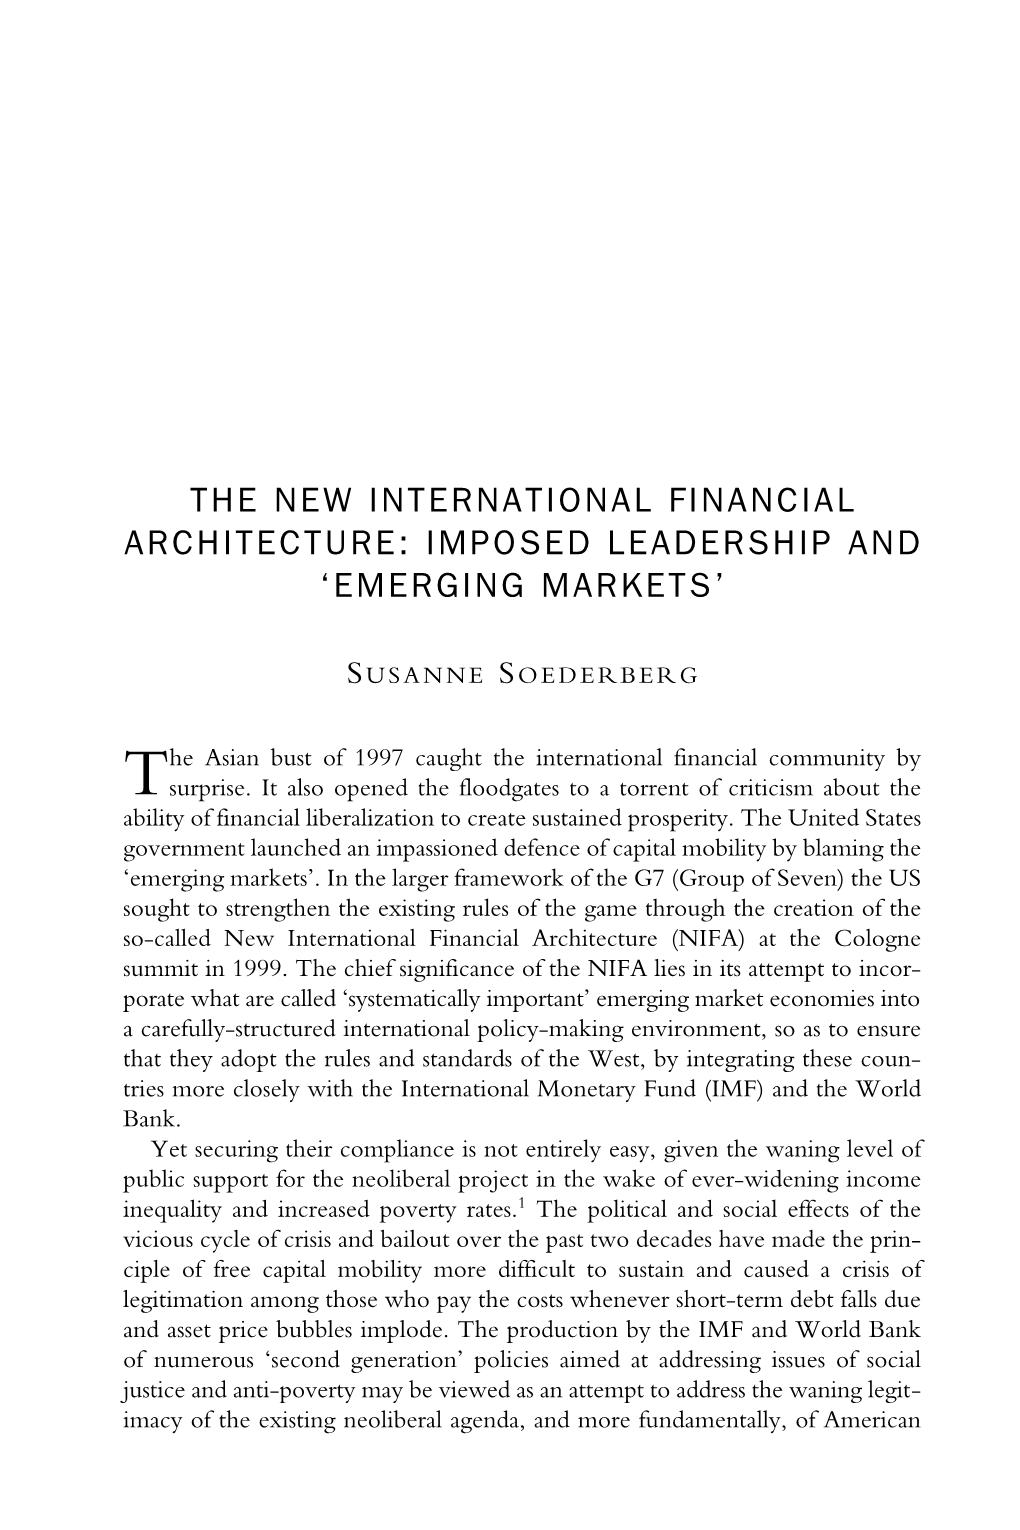 The New International Financial Architecture: Imposed Leadership and ‘Emerging Markets’